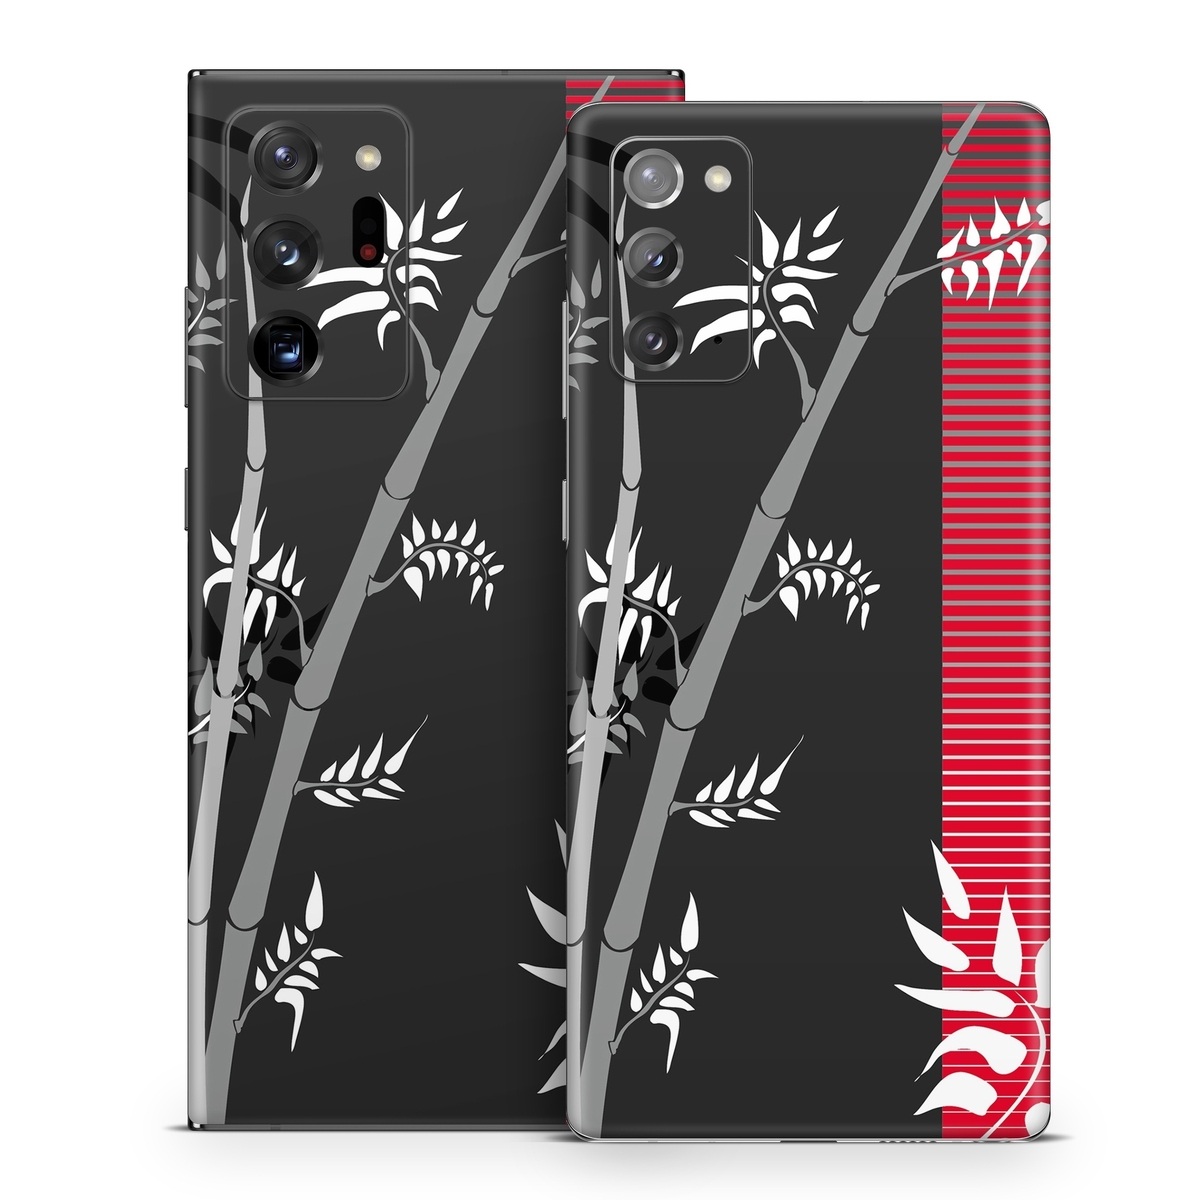 Samsung Galaxy Note 20 Series Skin design of Tree, Branch, Plant, Graphic design, Bamboo, Illustration, Plant stem, Black-and-white, with black, red, gray, white colors